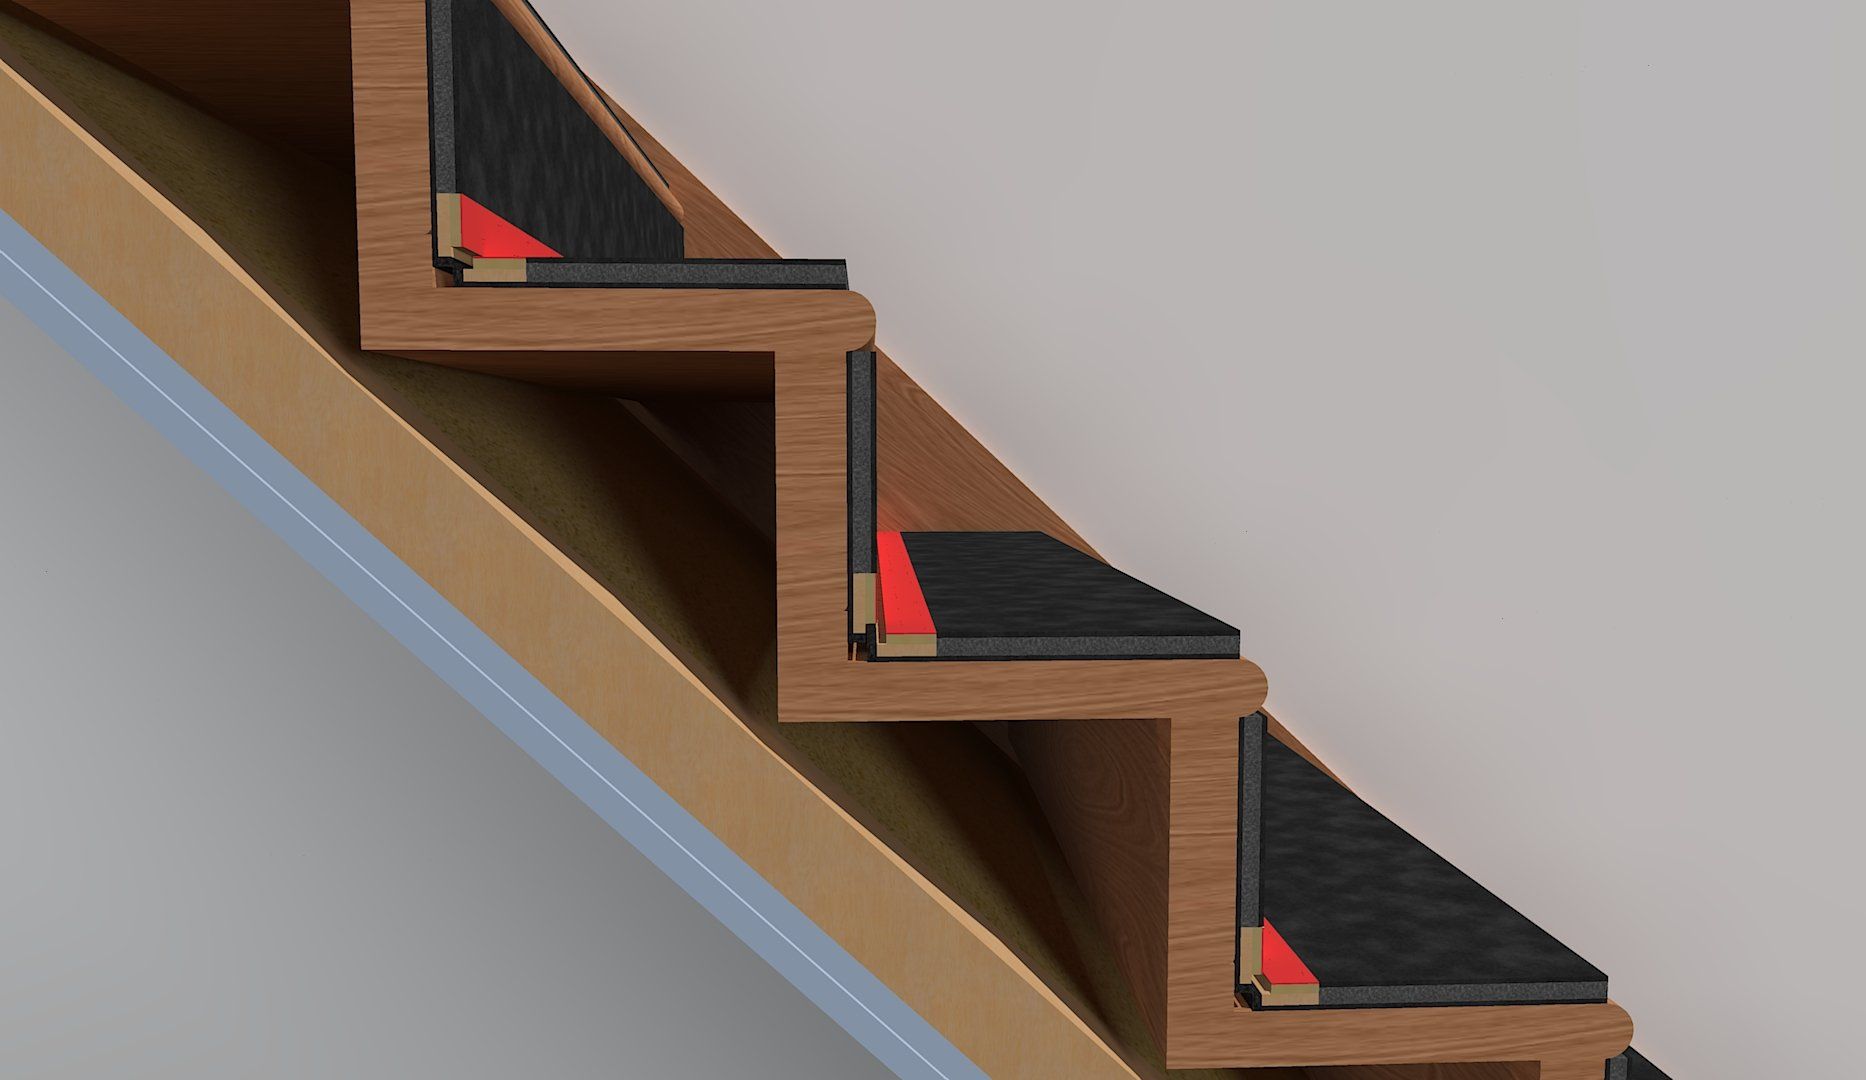 Soundproofing stair treads and risers